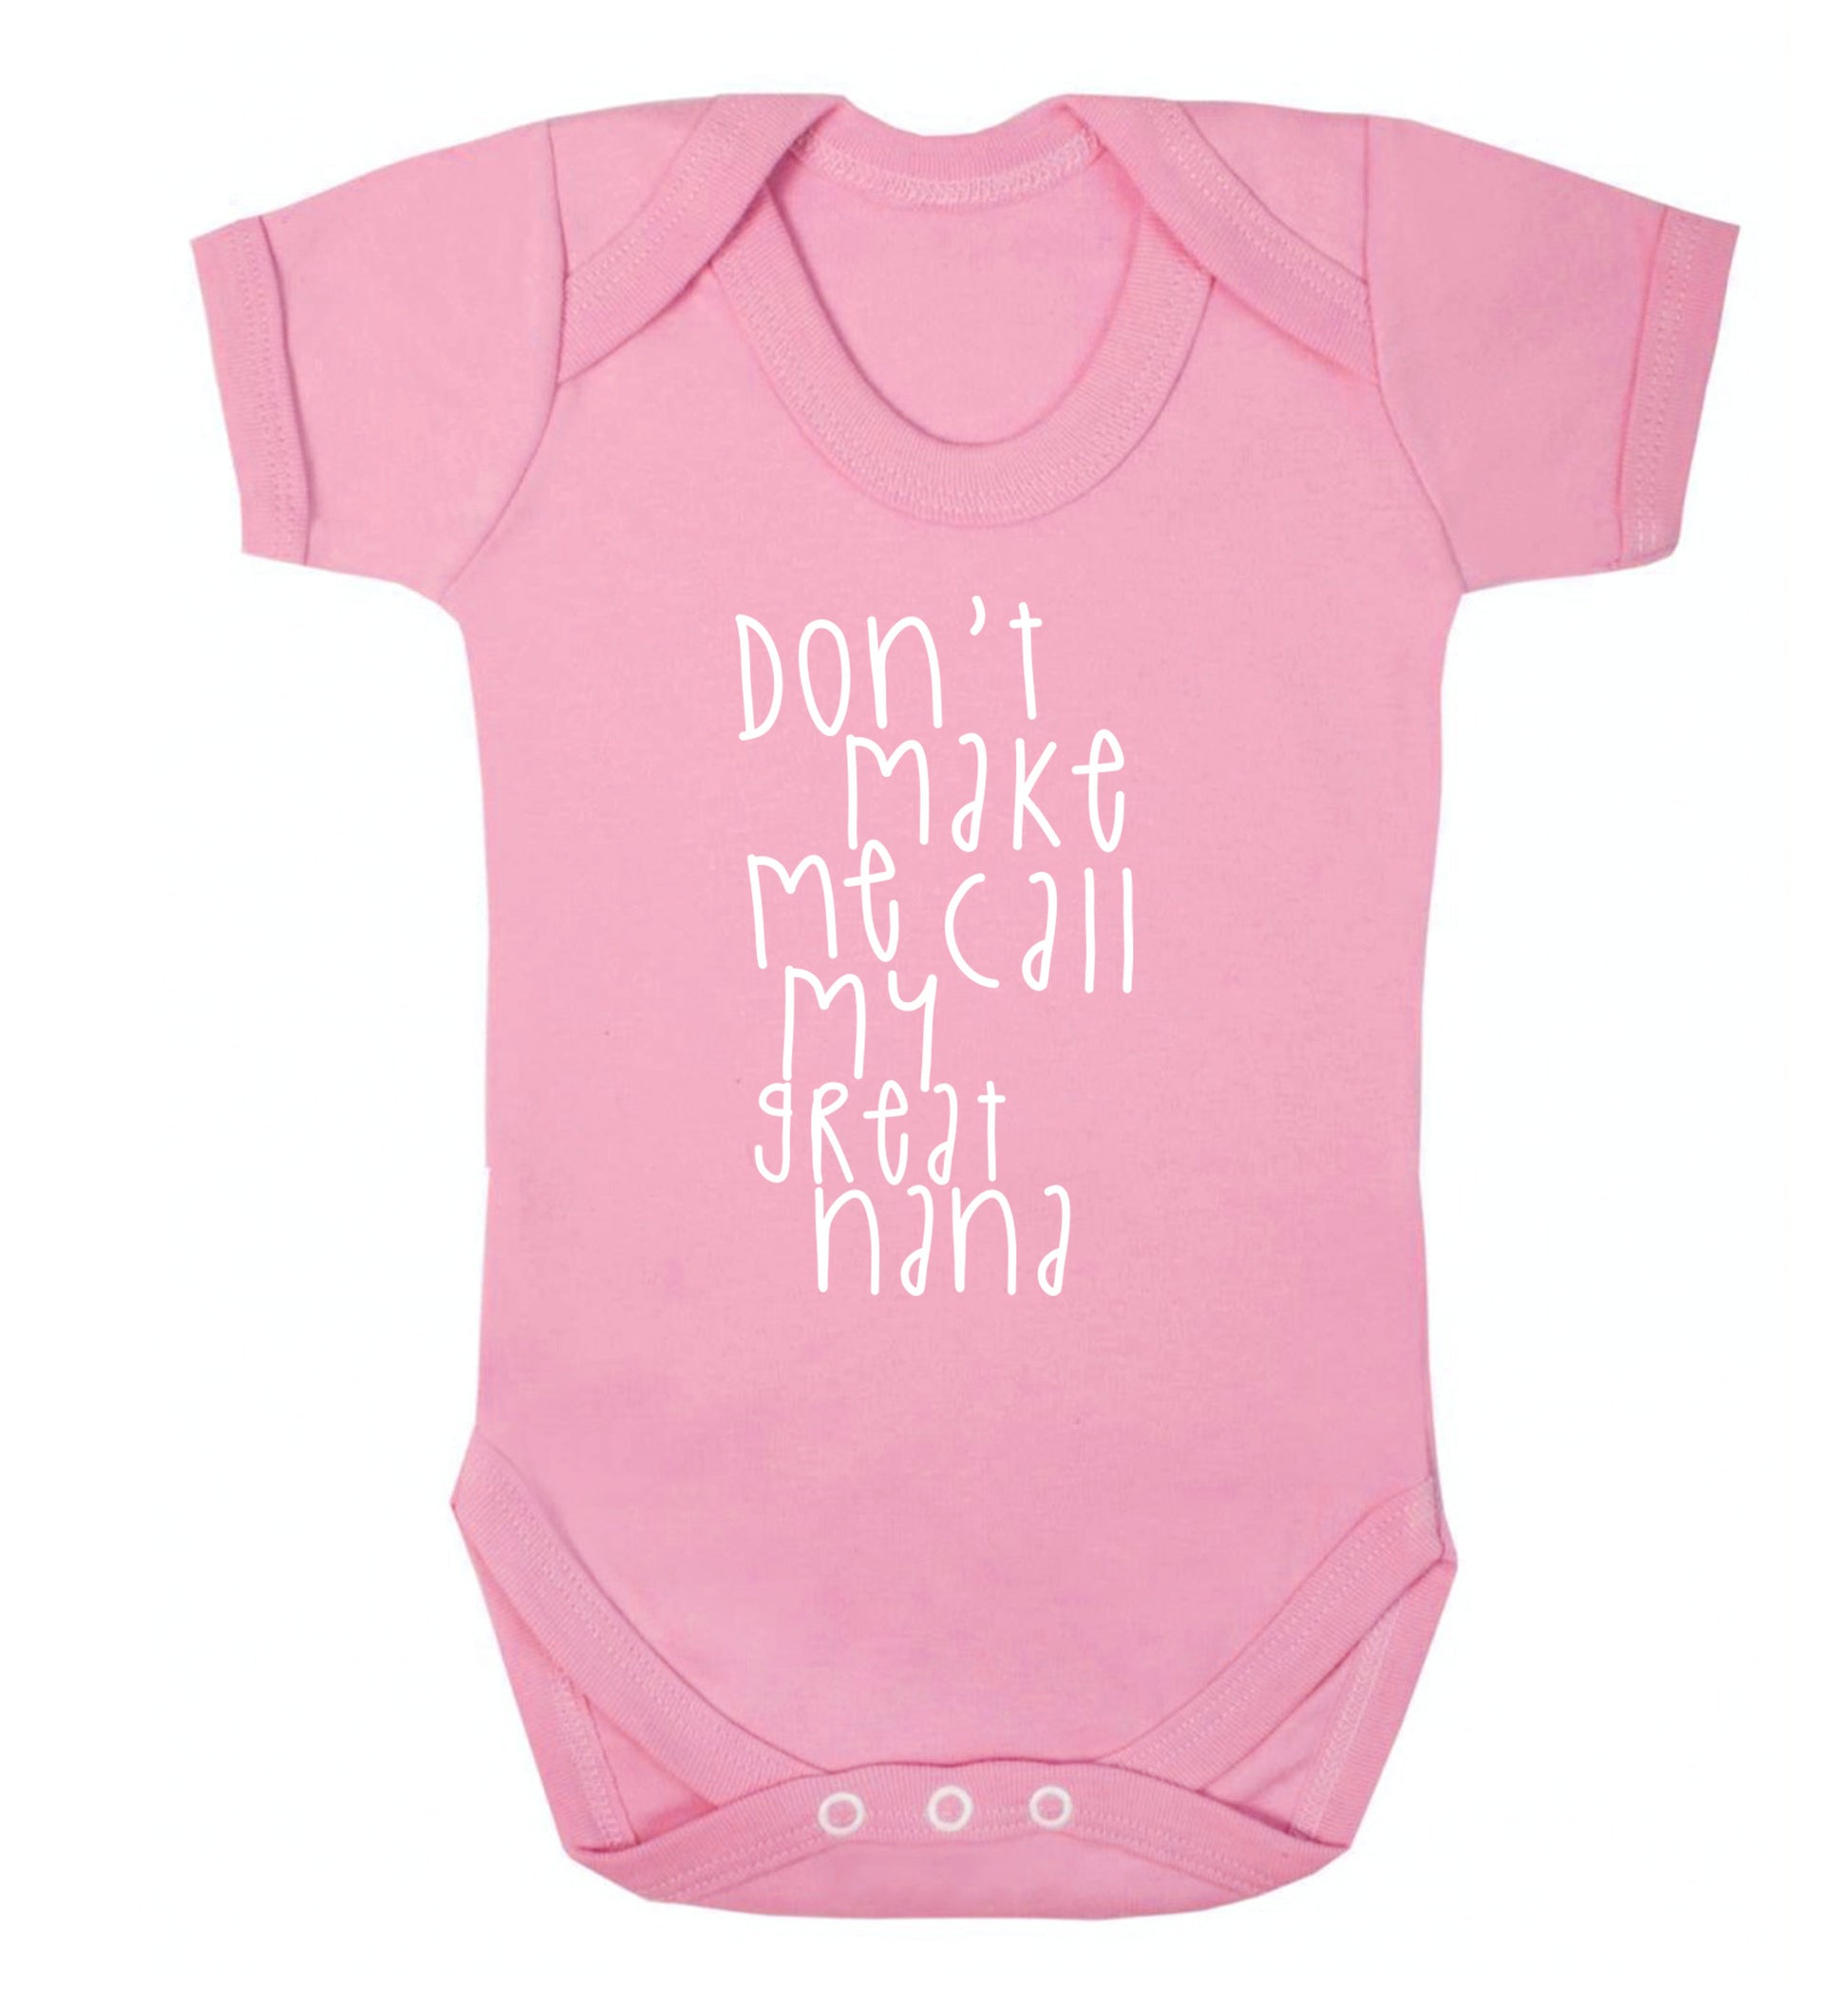 Don't make me call my great nana Baby Vest pale pink 18-24 months